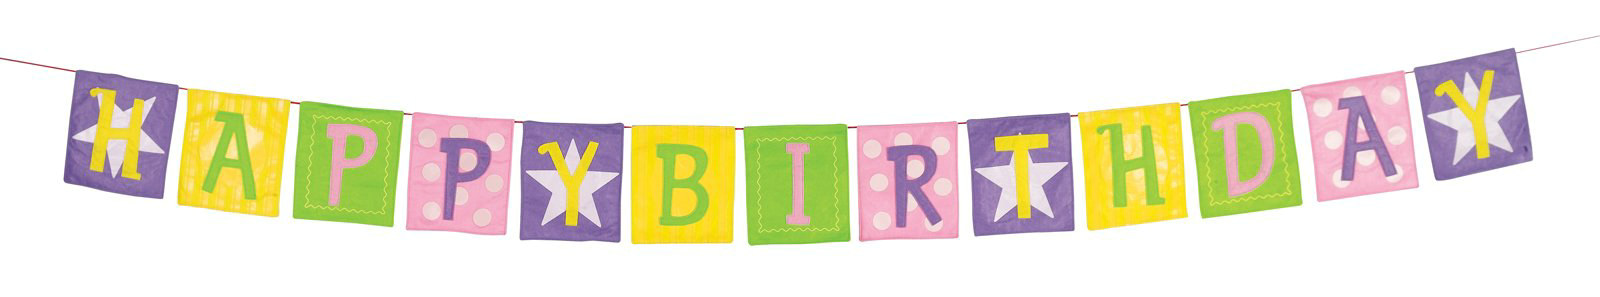 Appliqued Birthday Banner - Pastel Colored